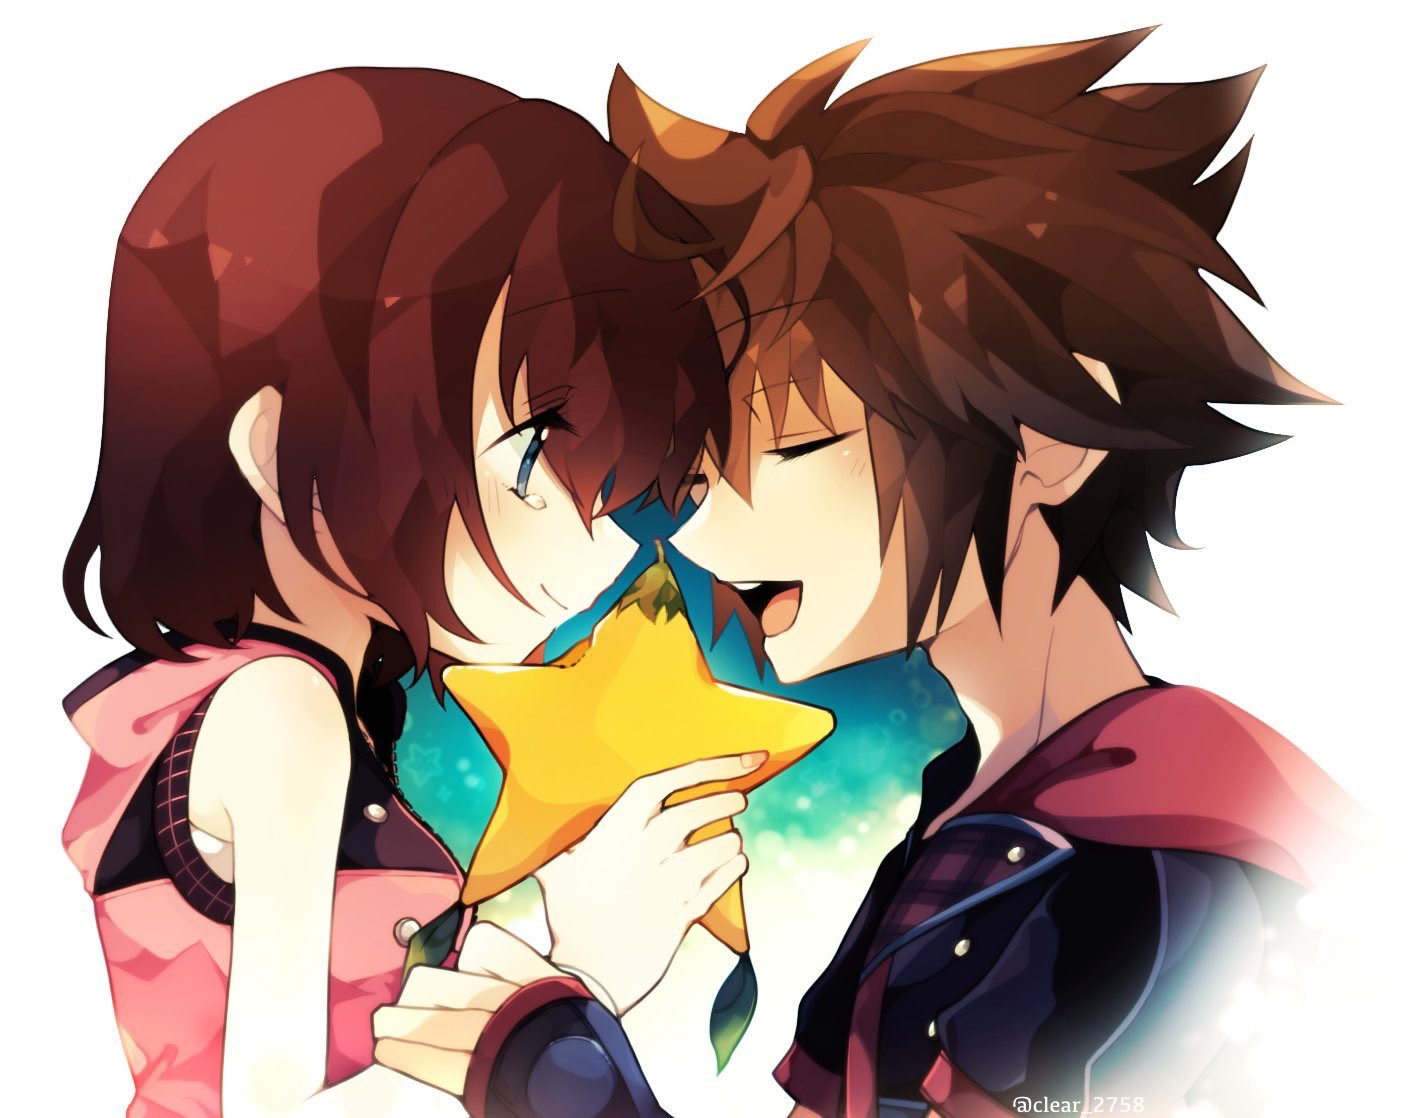 1boy 1girl bare_shoulders brown_hair clear_2758 closed_eyes dress food fruit hair_between_eyes happy_tears holding holding_another's_wrist holding_food holding_fruit hood hood_down hooded_dress kairi_(kingdom_hearts) kingdom_hearts kingdom_hearts_iii open_mouth paopu_fruit pink_dress red_hair short_hair smile sora_(kingdom_hearts) spiked_hair tears upper_body